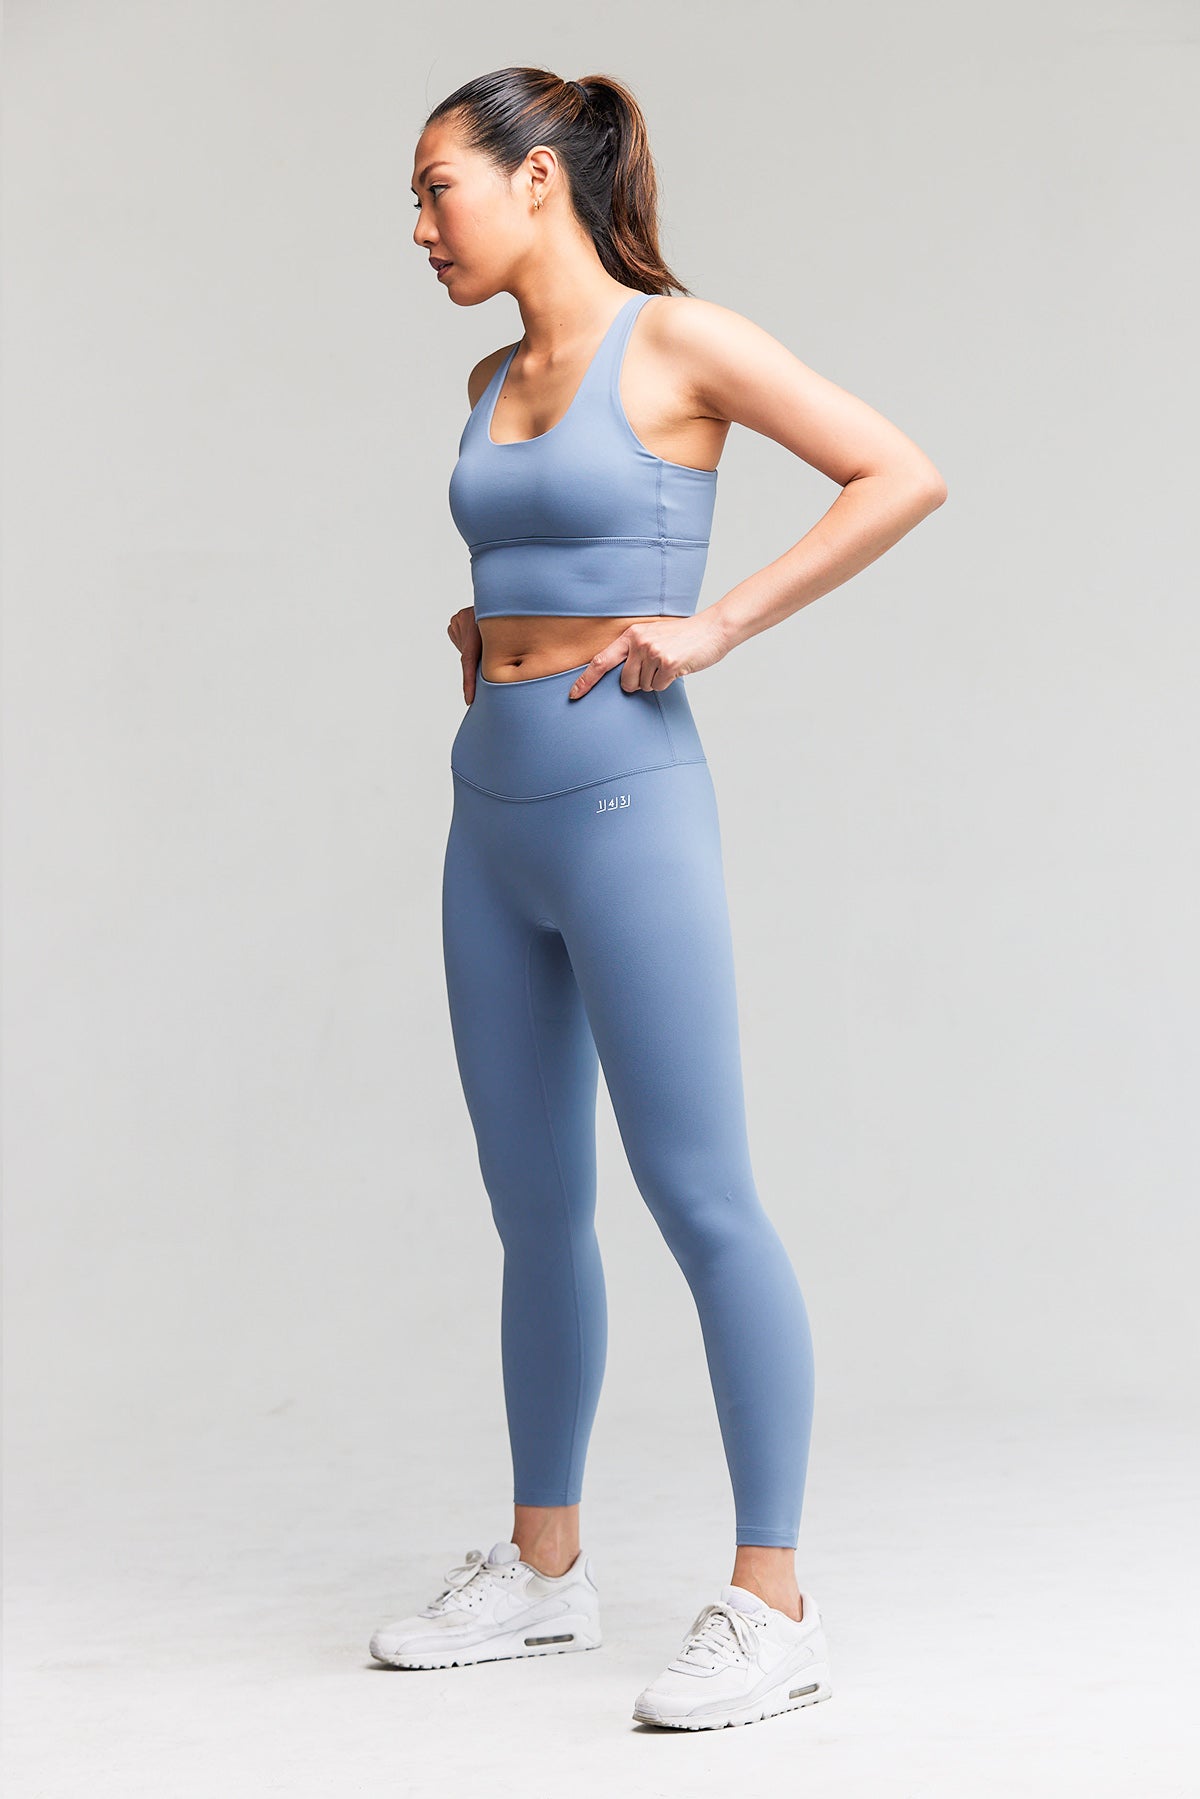 Melt Fit, Essential Leggings for Women (Small, Grey Storm) at   Women's Clothing store